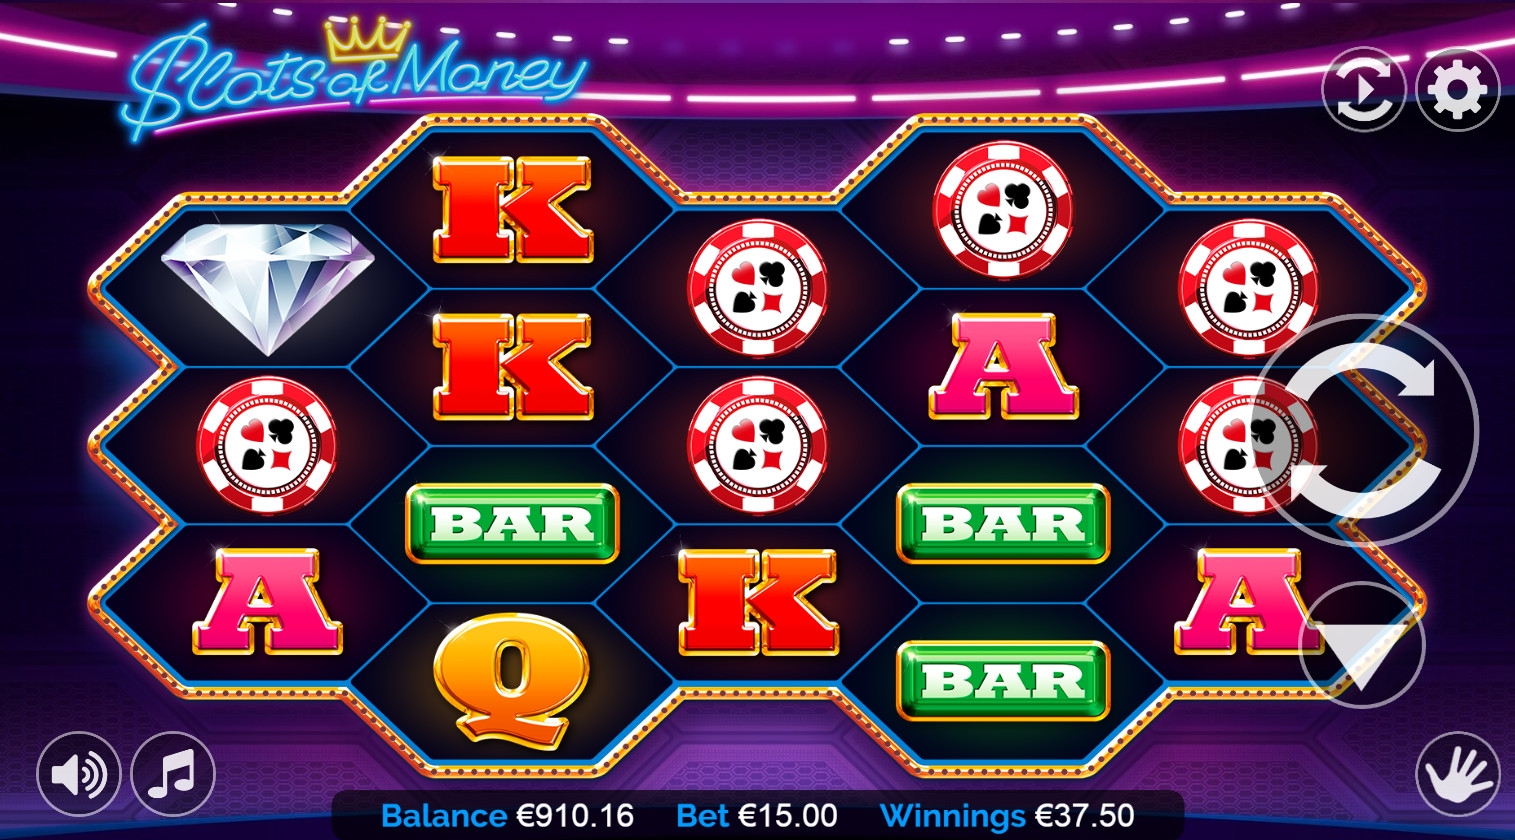 Slots of Money (Slots of Money) from category Slots